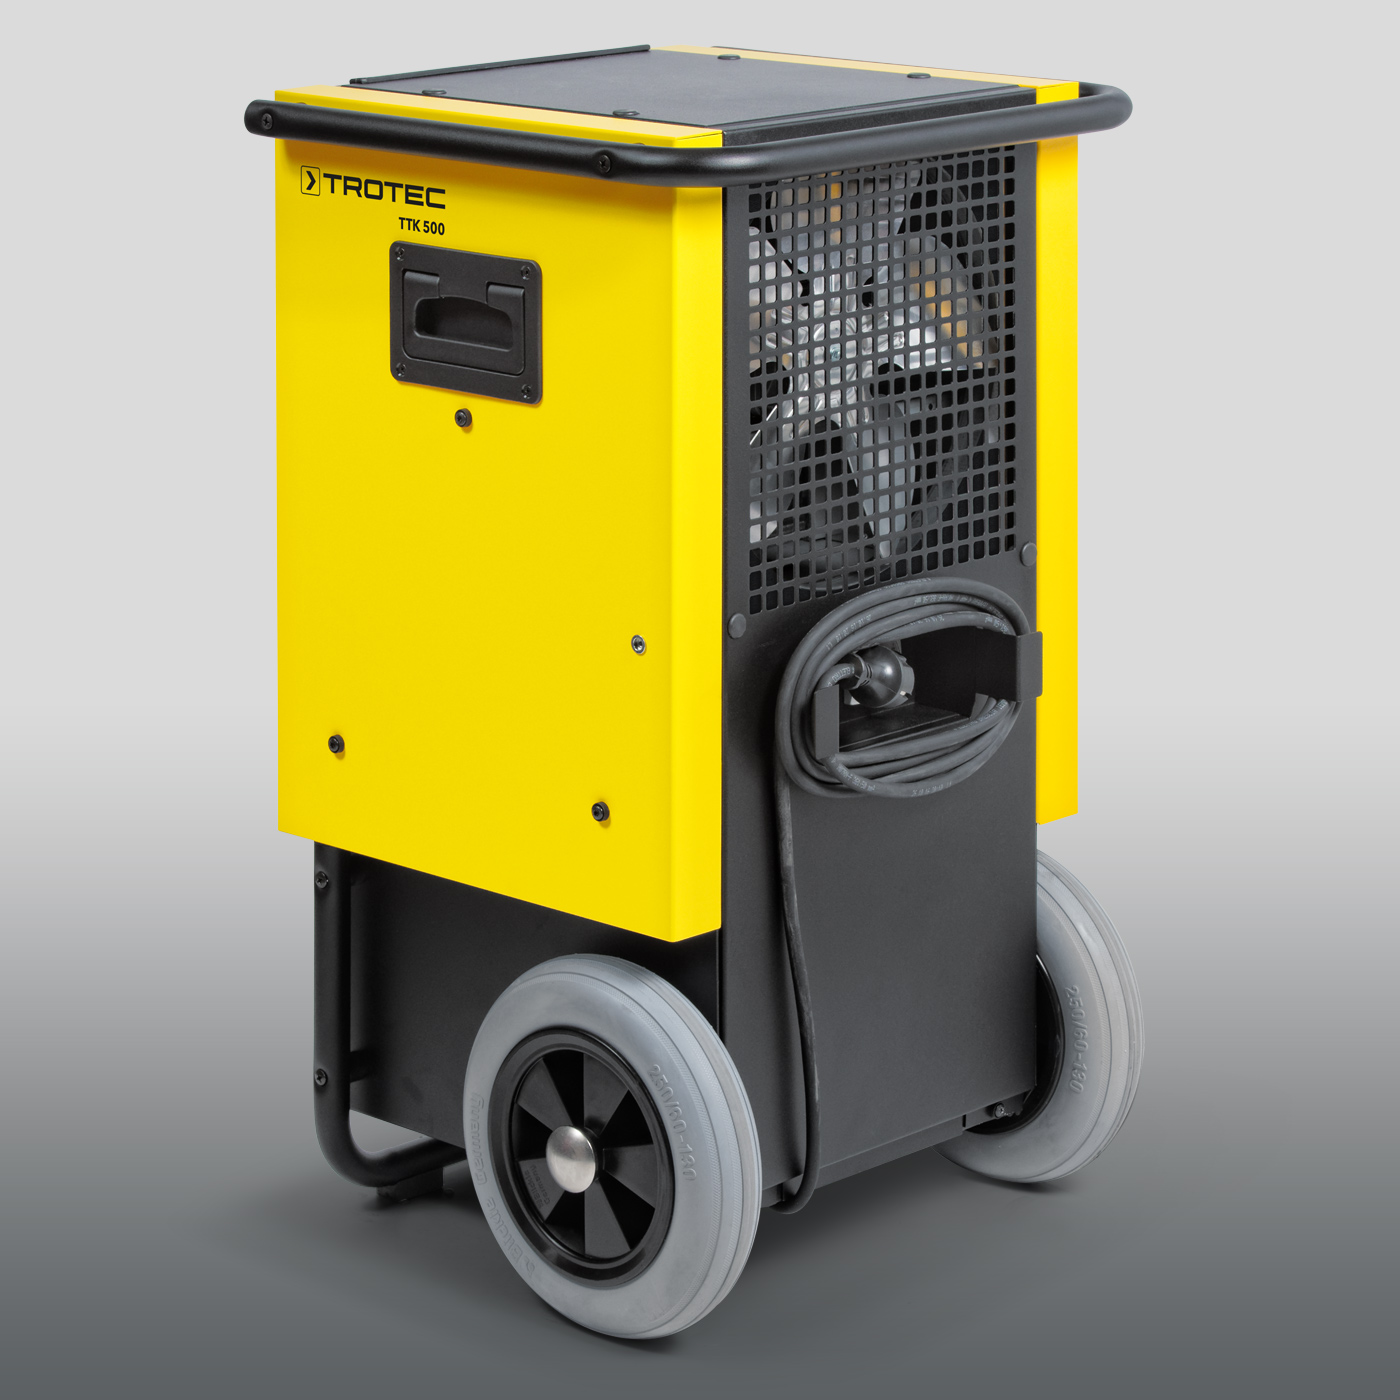 TTK 500: The mobile solution with a high dehumidification capacity